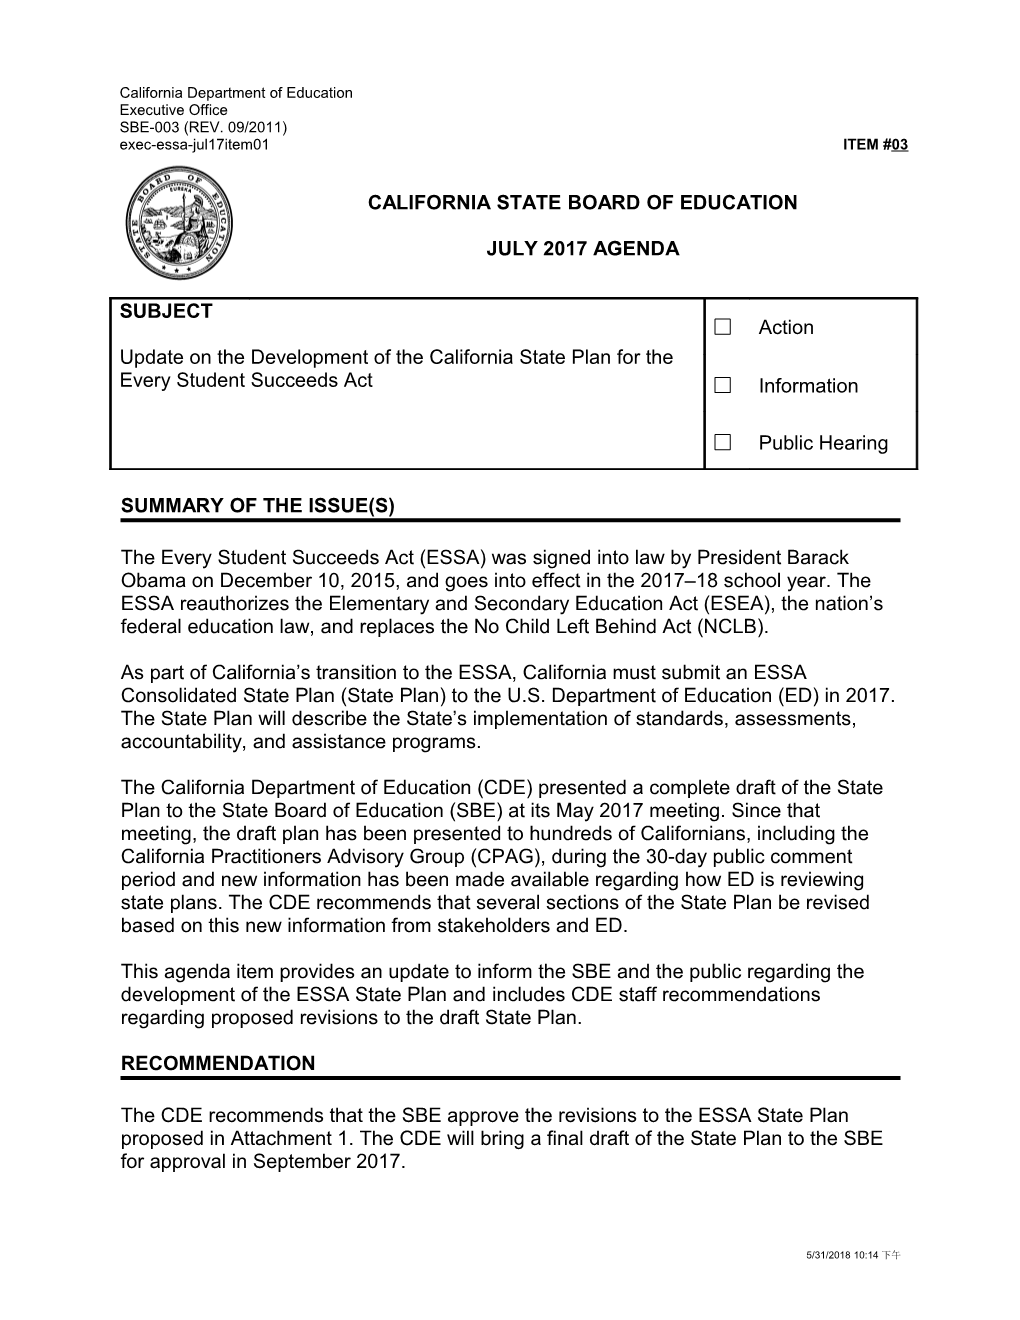 July 2017 Agenda Item 03 Revised - Meeting Agendas (CA State Board of Education)